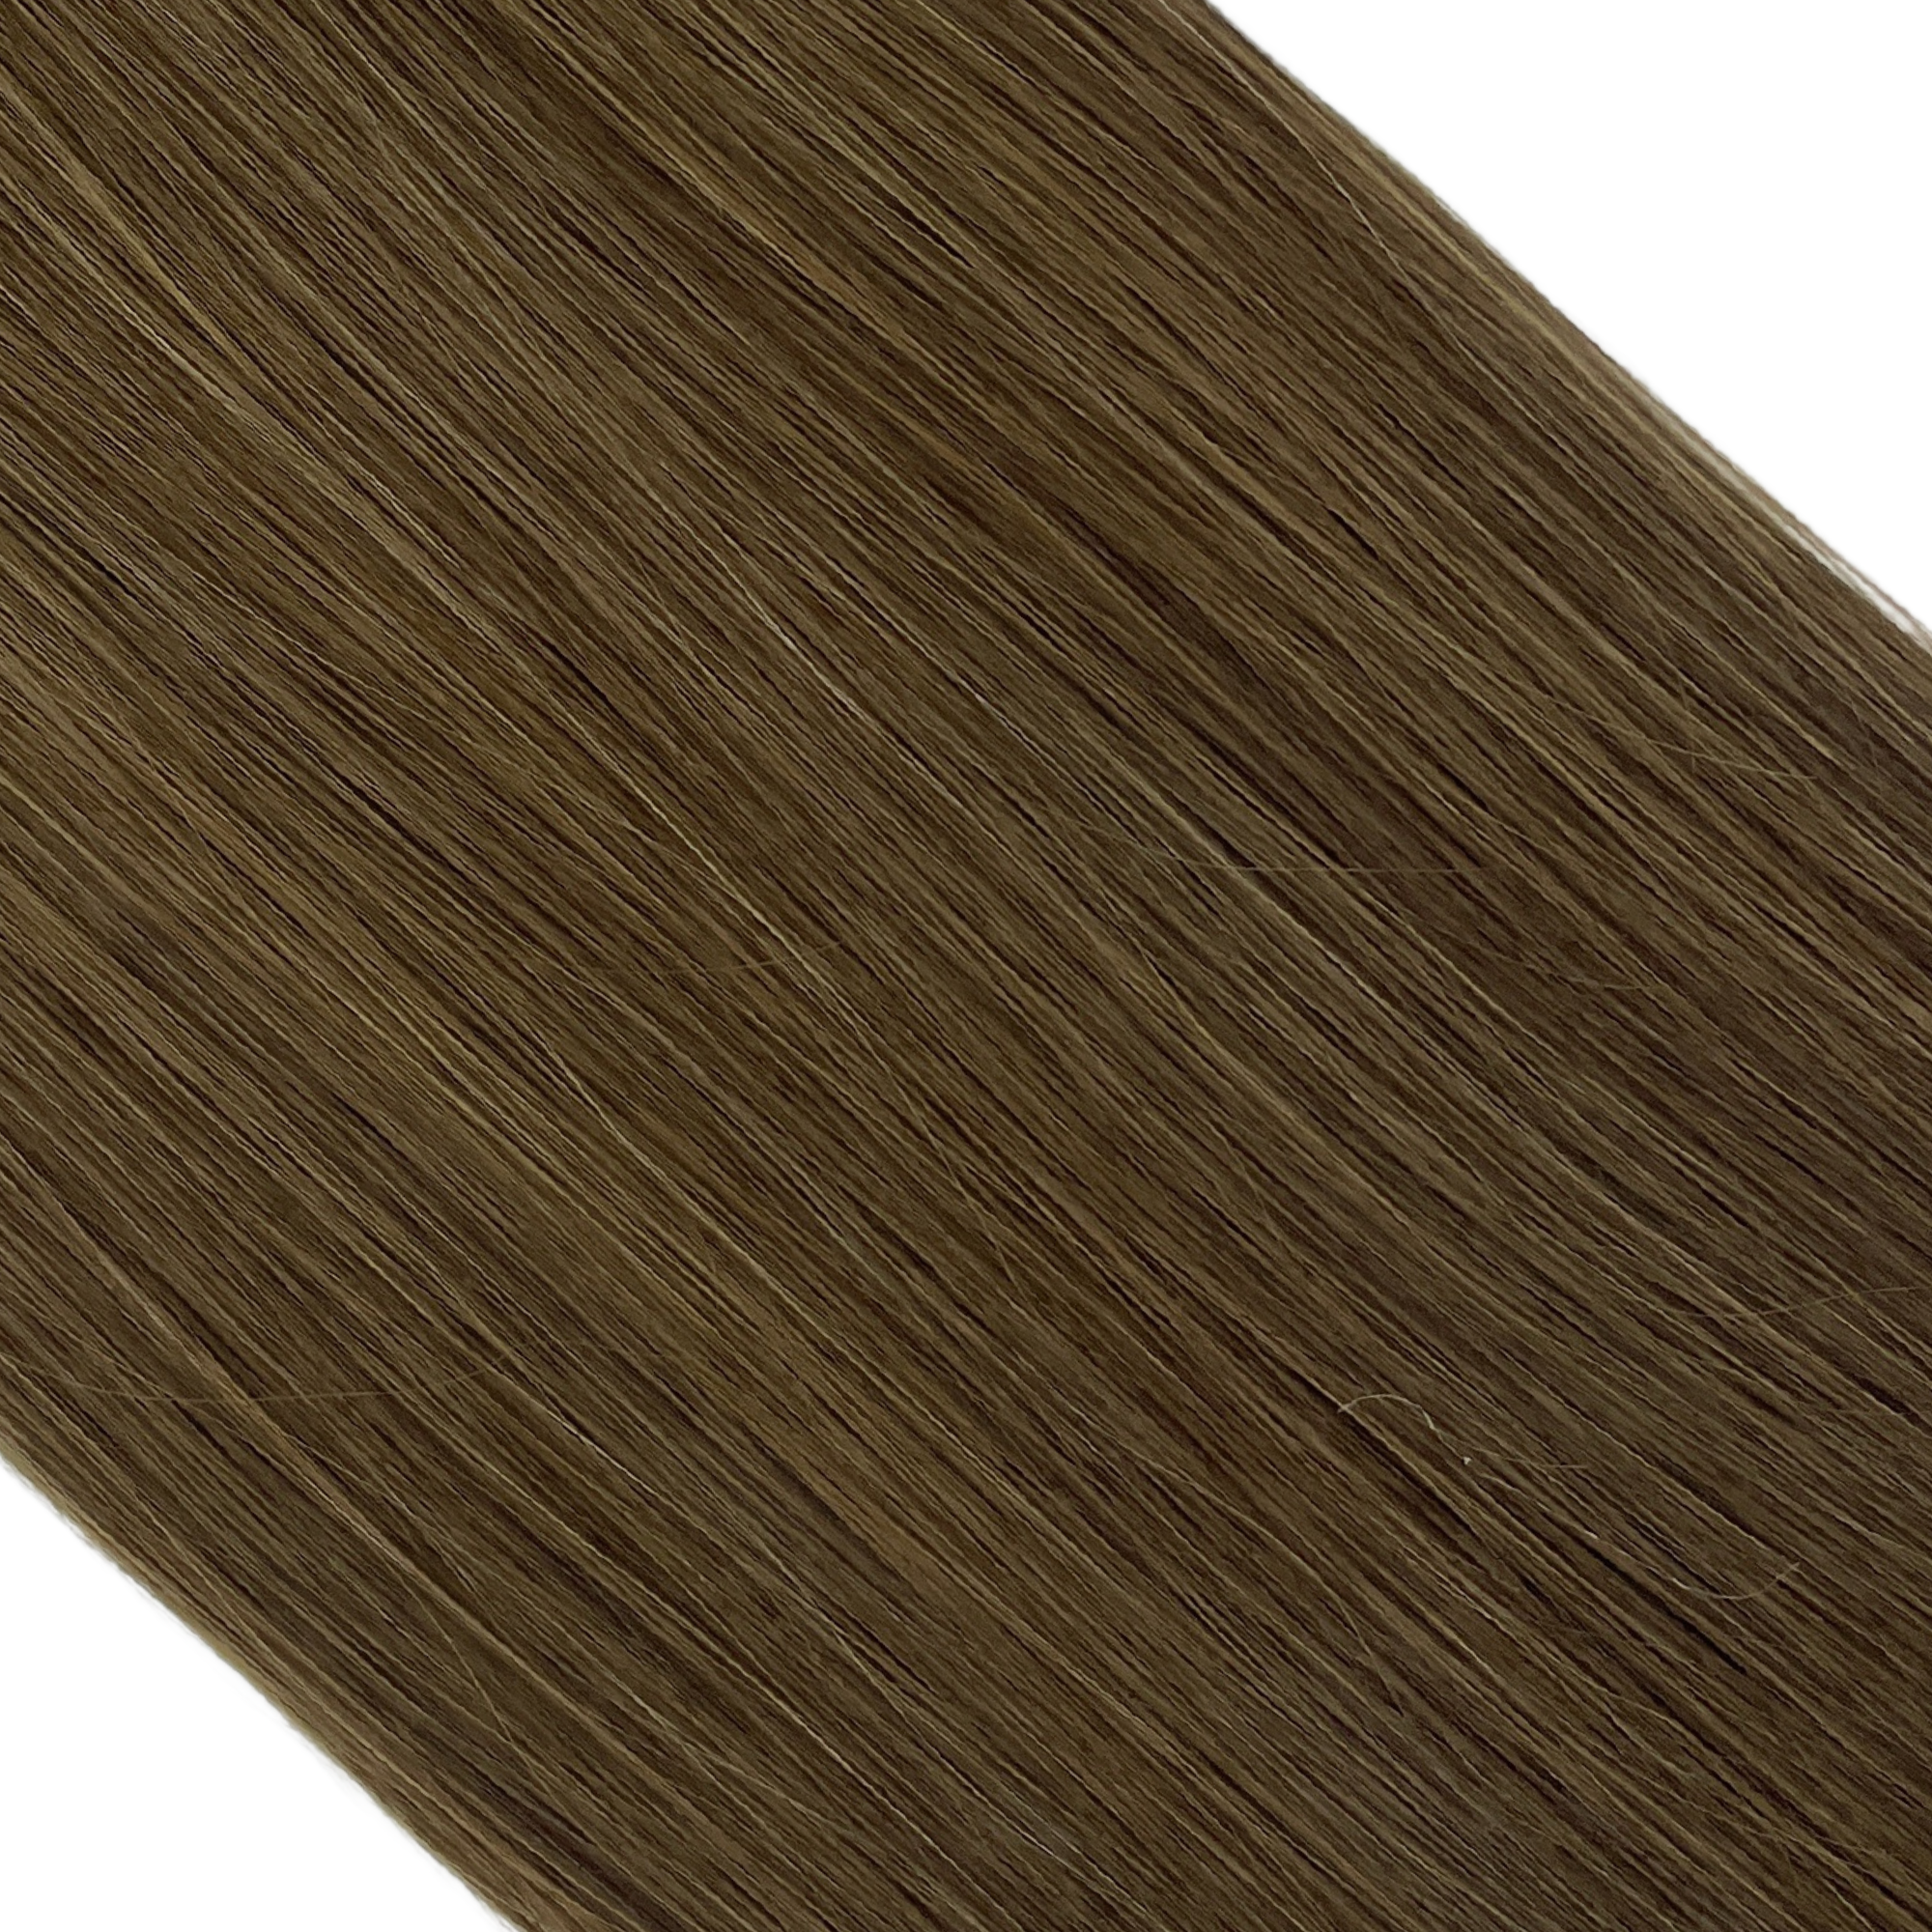 "hair rehab london 18" weft hair extensions shade swatch titled smoky brunette"